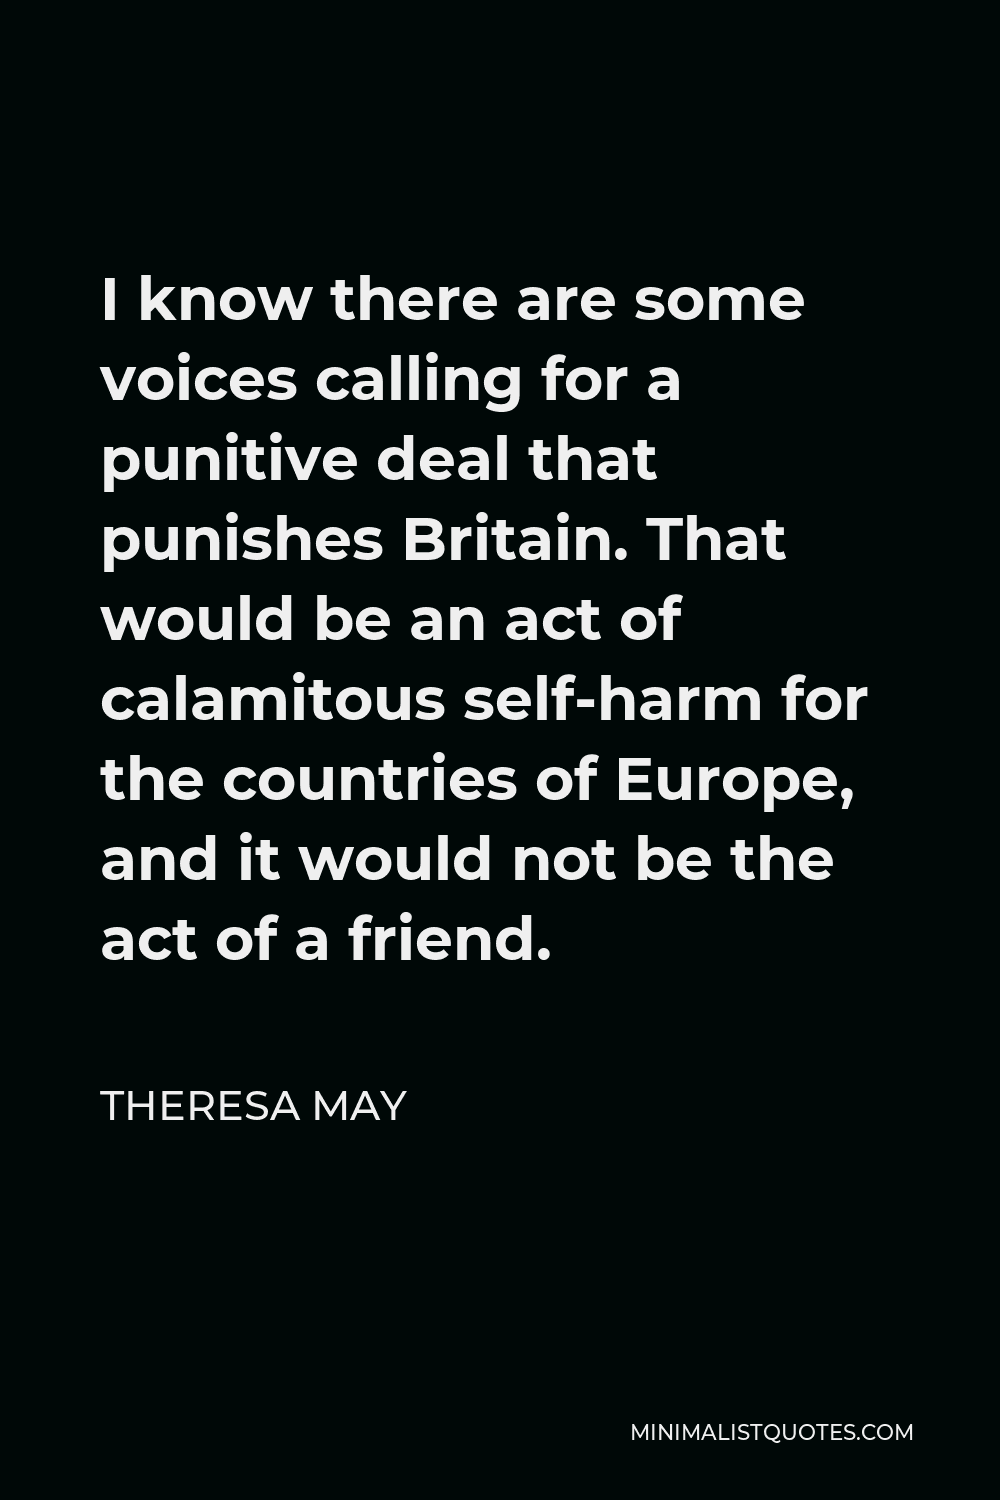 Theresa May Quote - I know there are some voices calling for a punitive deal that punishes Britain. That would be an act of calamitous self-harm for the countries of Europe, and it would not be the act of a friend.